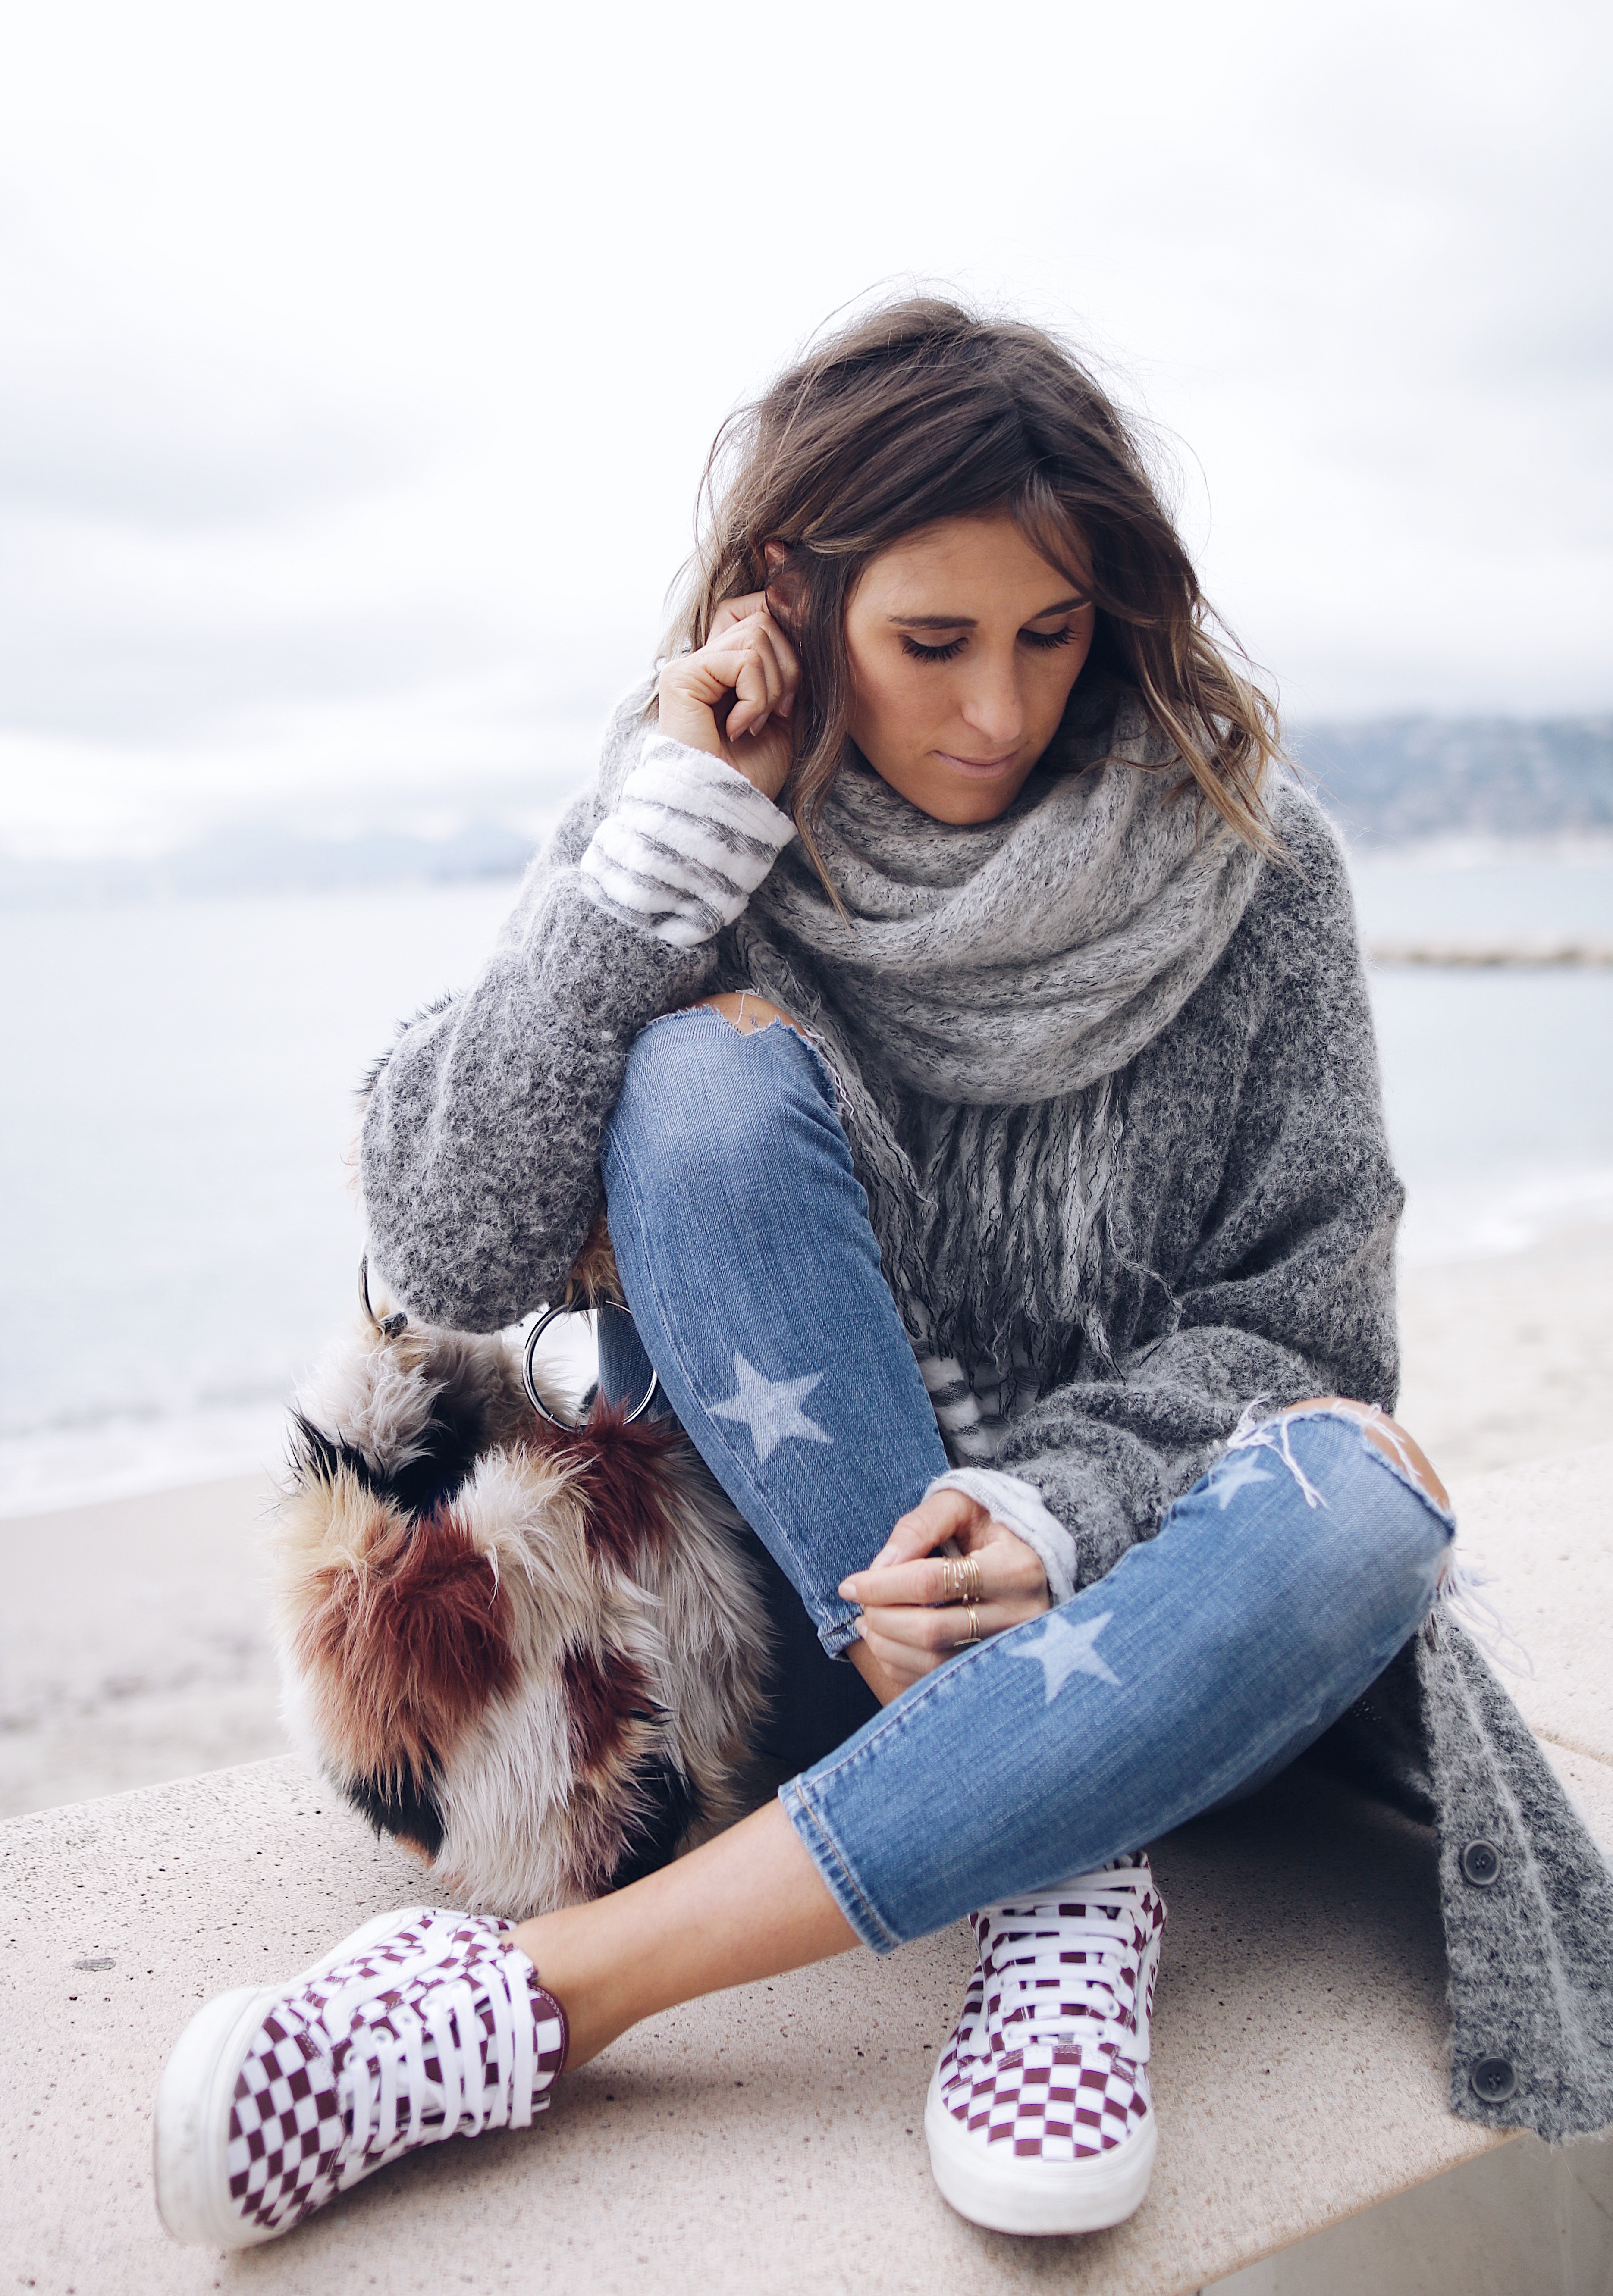 Casual style, denim style, knit lover, knit outfit, knit and denim outfit